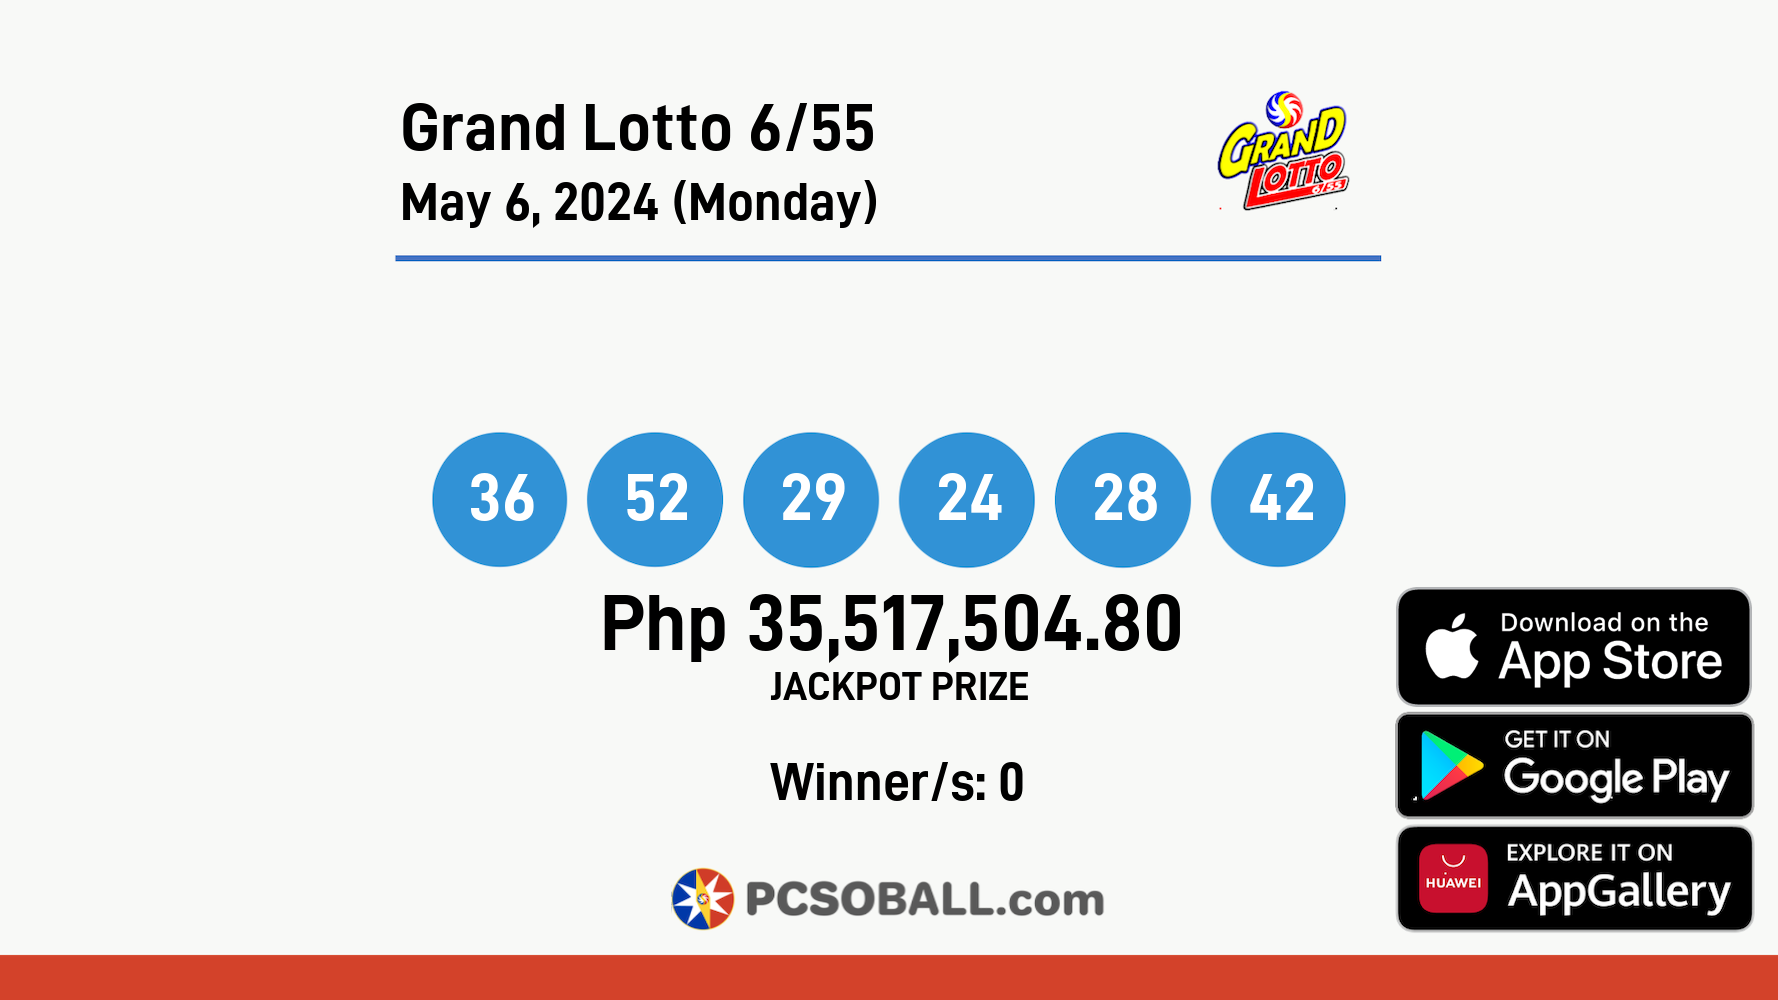 Grand Lotto 6/55 May 6, 2024 (Monday) Result